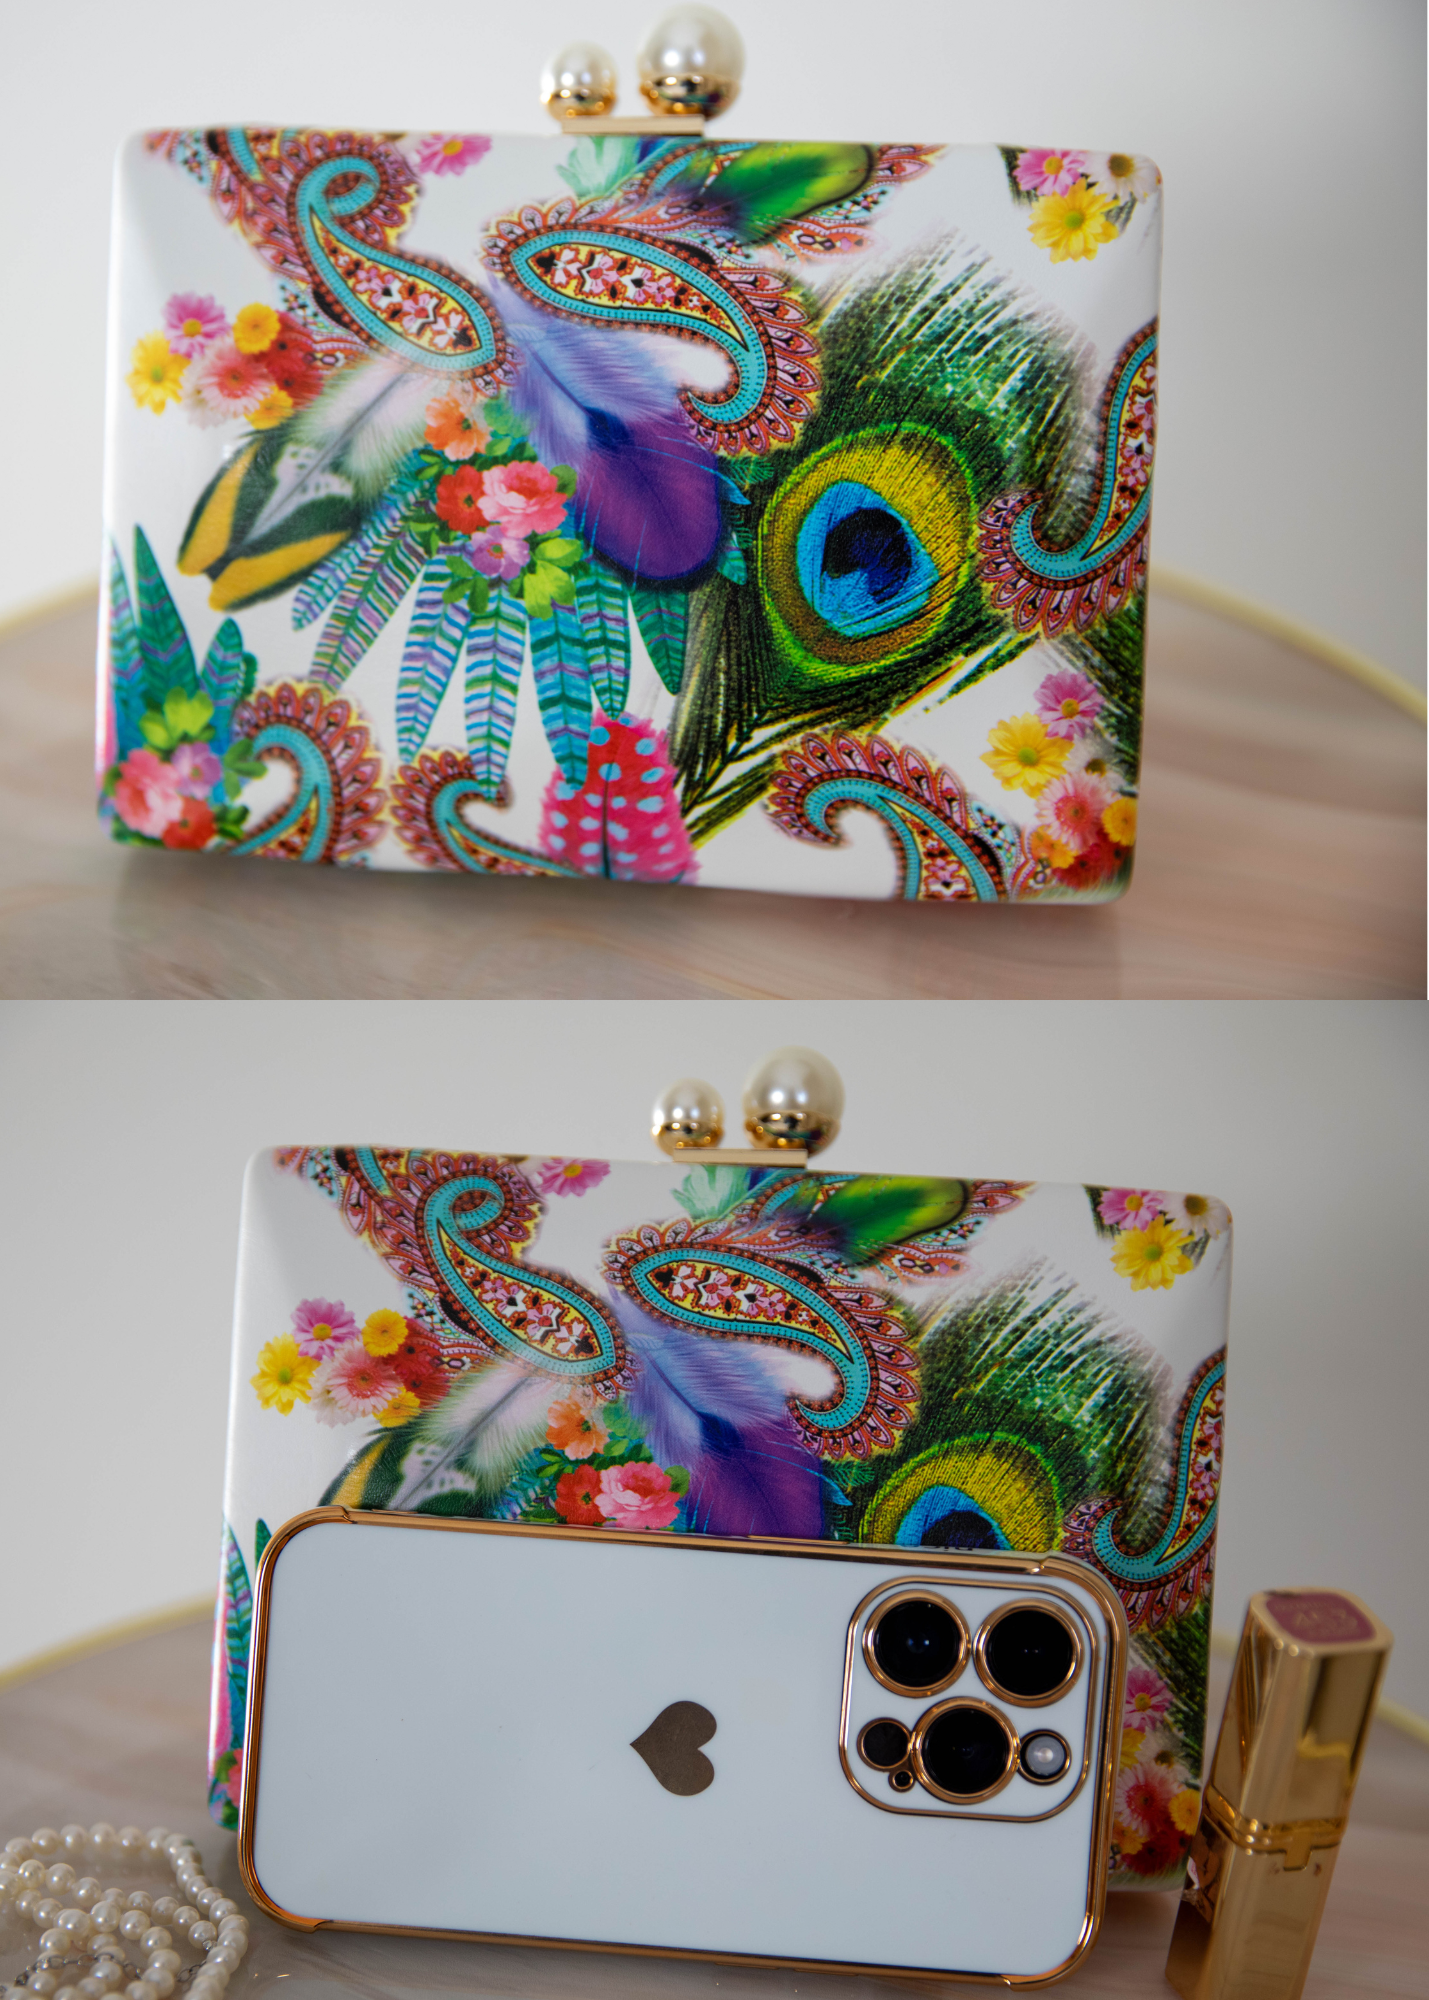 Peacock Feather Evening Clutch Bag